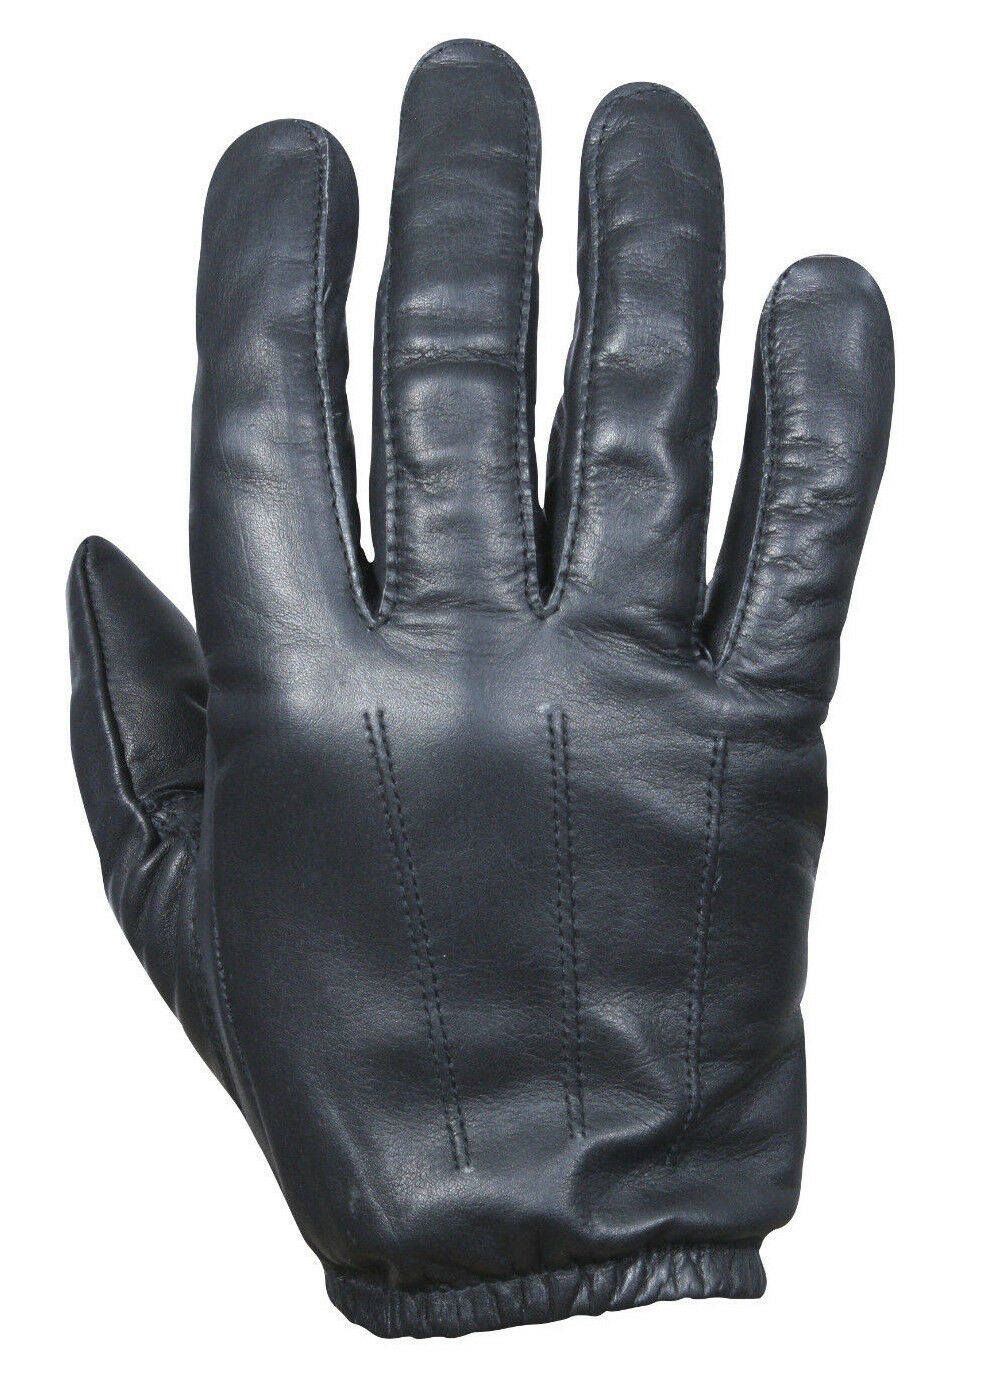 Rothco Police Duty Search Gloves